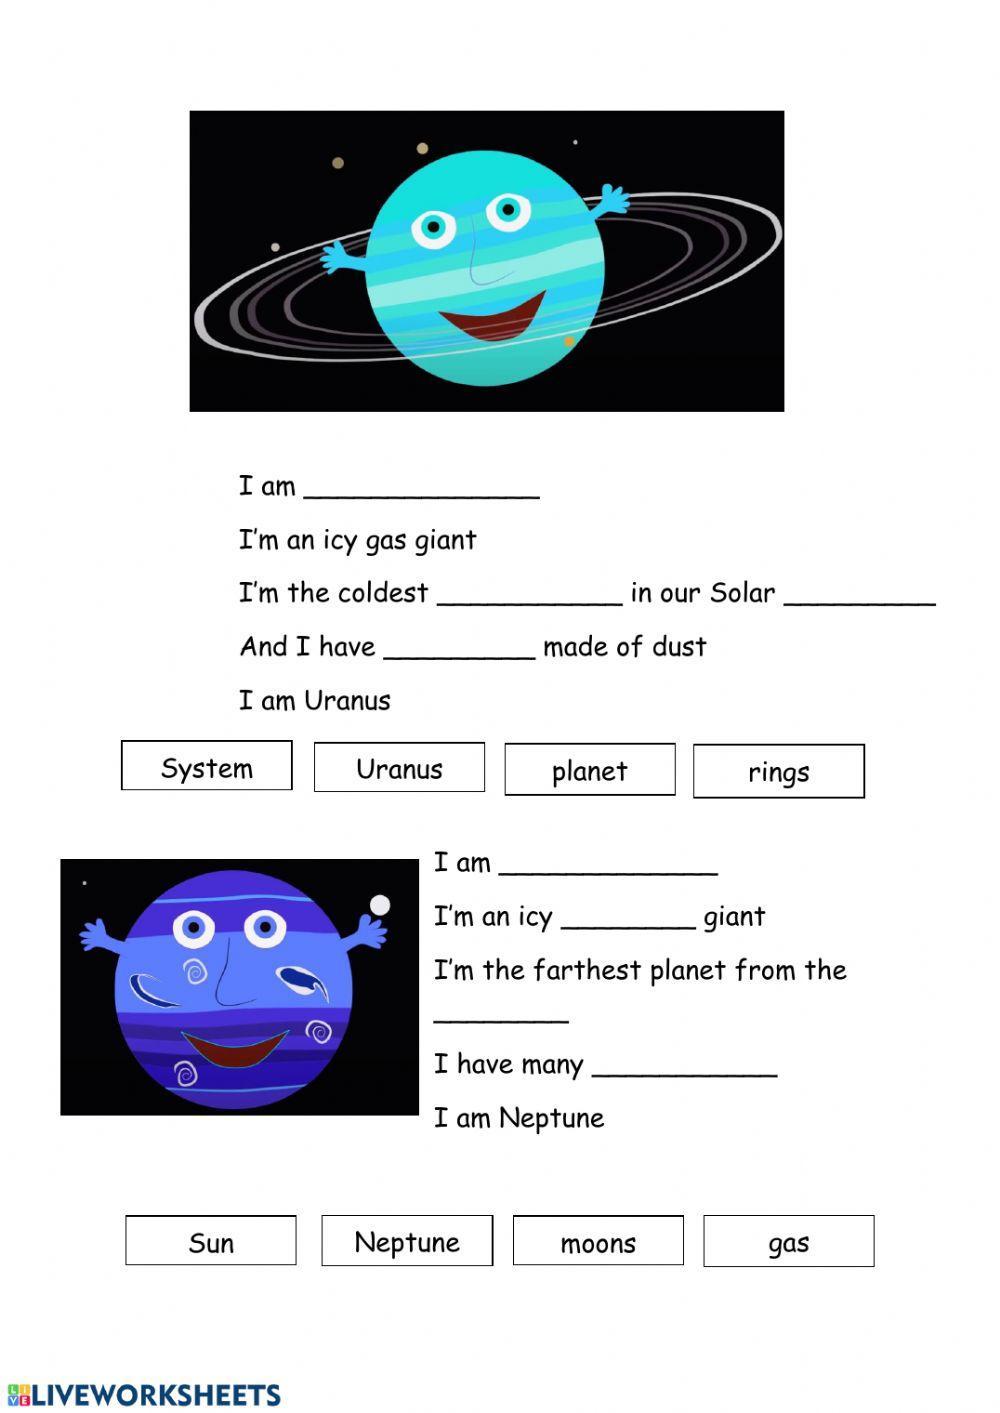 The Solar System song